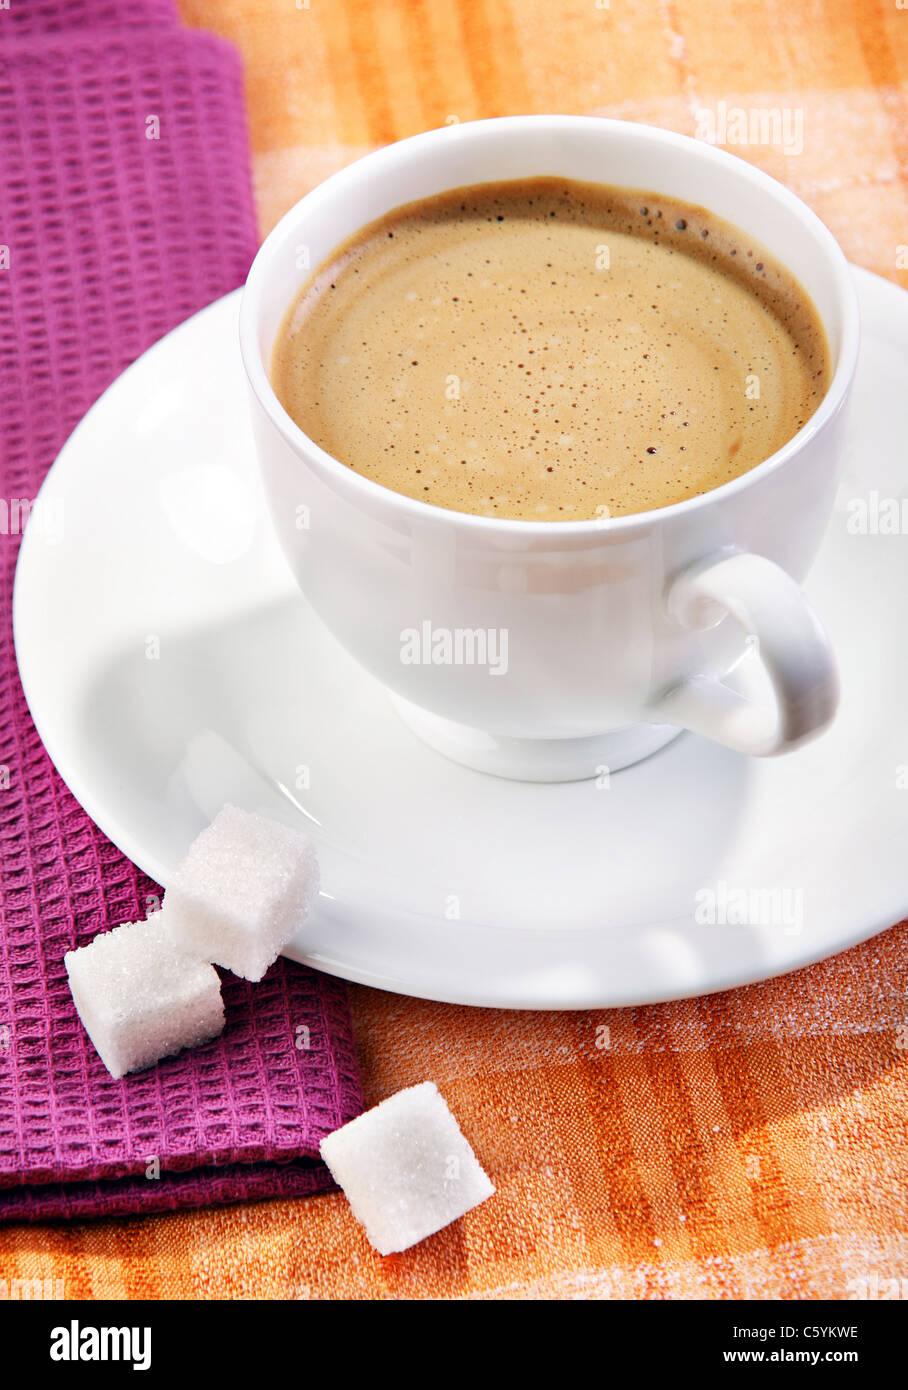 Coffee hot drink with sugar cube Stock Photo